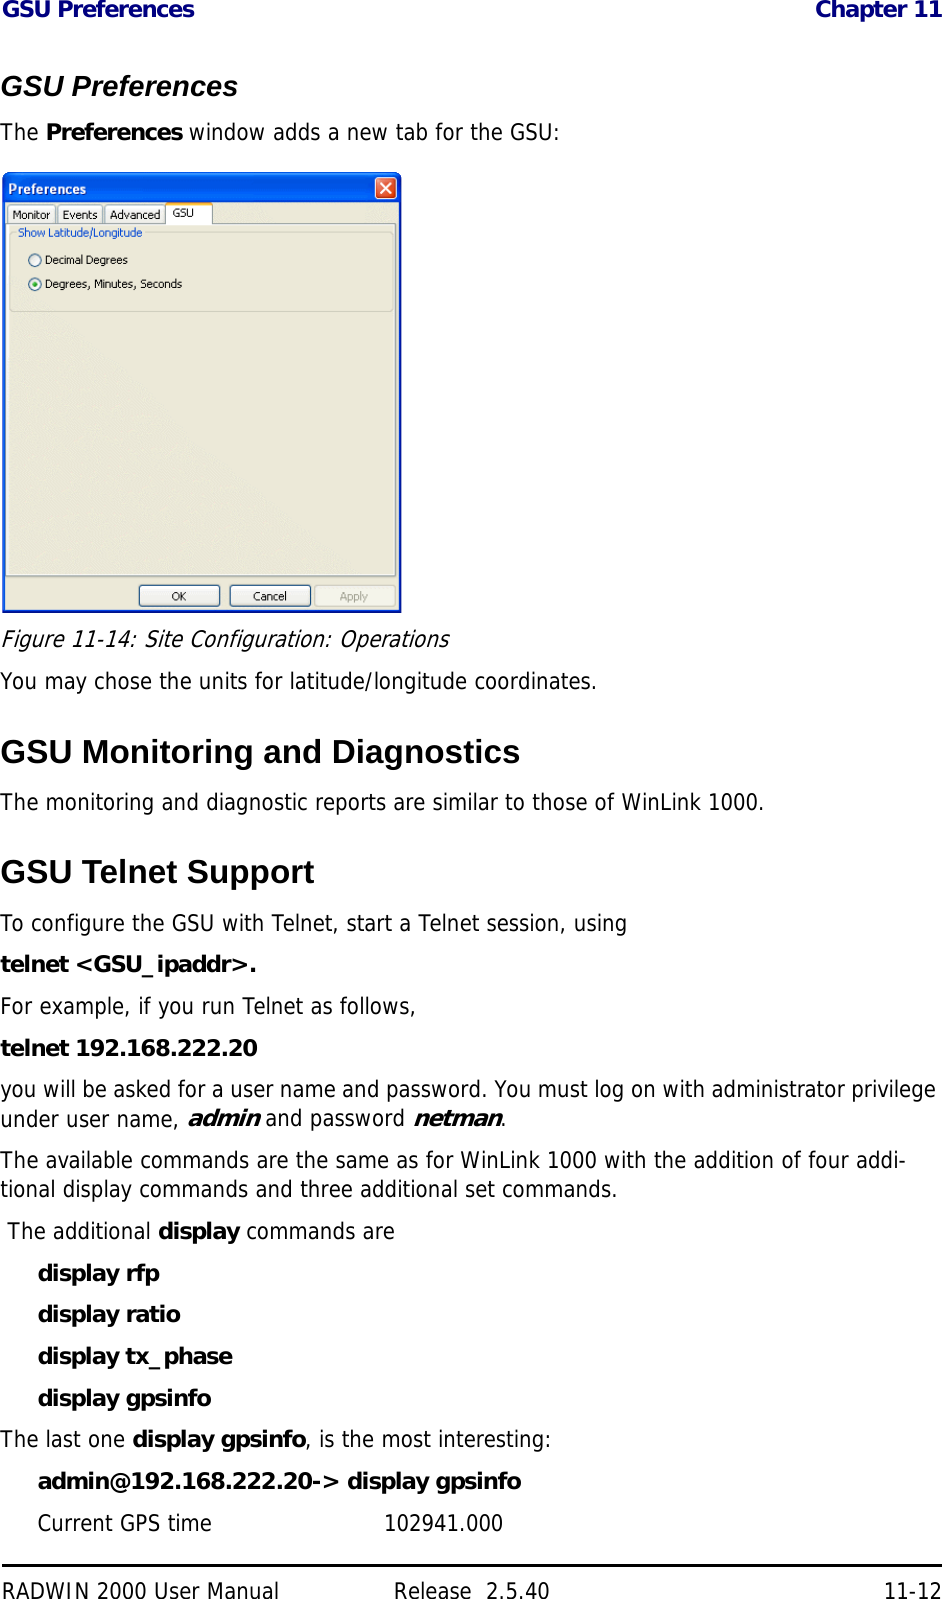 GSU Preferences Chapter 11RADWIN 2000 User Manual Release  2.5.40 11-12GSU PreferencesThe Preferences window adds a new tab for the GSU:Figure 11-14: Site Configuration: OperationsYou may chose the units for latitude/longitude coordinates.GSU Monitoring and DiagnosticsThe monitoring and diagnostic reports are similar to those of WinLink 1000.GSU Telnet SupportTo configure the GSU with Telnet, start a Telnet session, usingtelnet &lt;GSU_ipaddr&gt;.For example, if you run Telnet as follows,telnet 192.168.222.20you will be asked for a user name and password. You must log on with administrator privilege under user name, admin and password netman.The available commands are the same as for WinLink 1000 with the addition of four addi-tional display commands and three additional set commands. The additional display commands are display rfpdisplay ratiodisplay tx_phasedisplay gpsinfoThe last one display gpsinfo, is the most interesting:admin@192.168.222.20-&gt; display gpsinfoCurrent GPS time                        102941.000